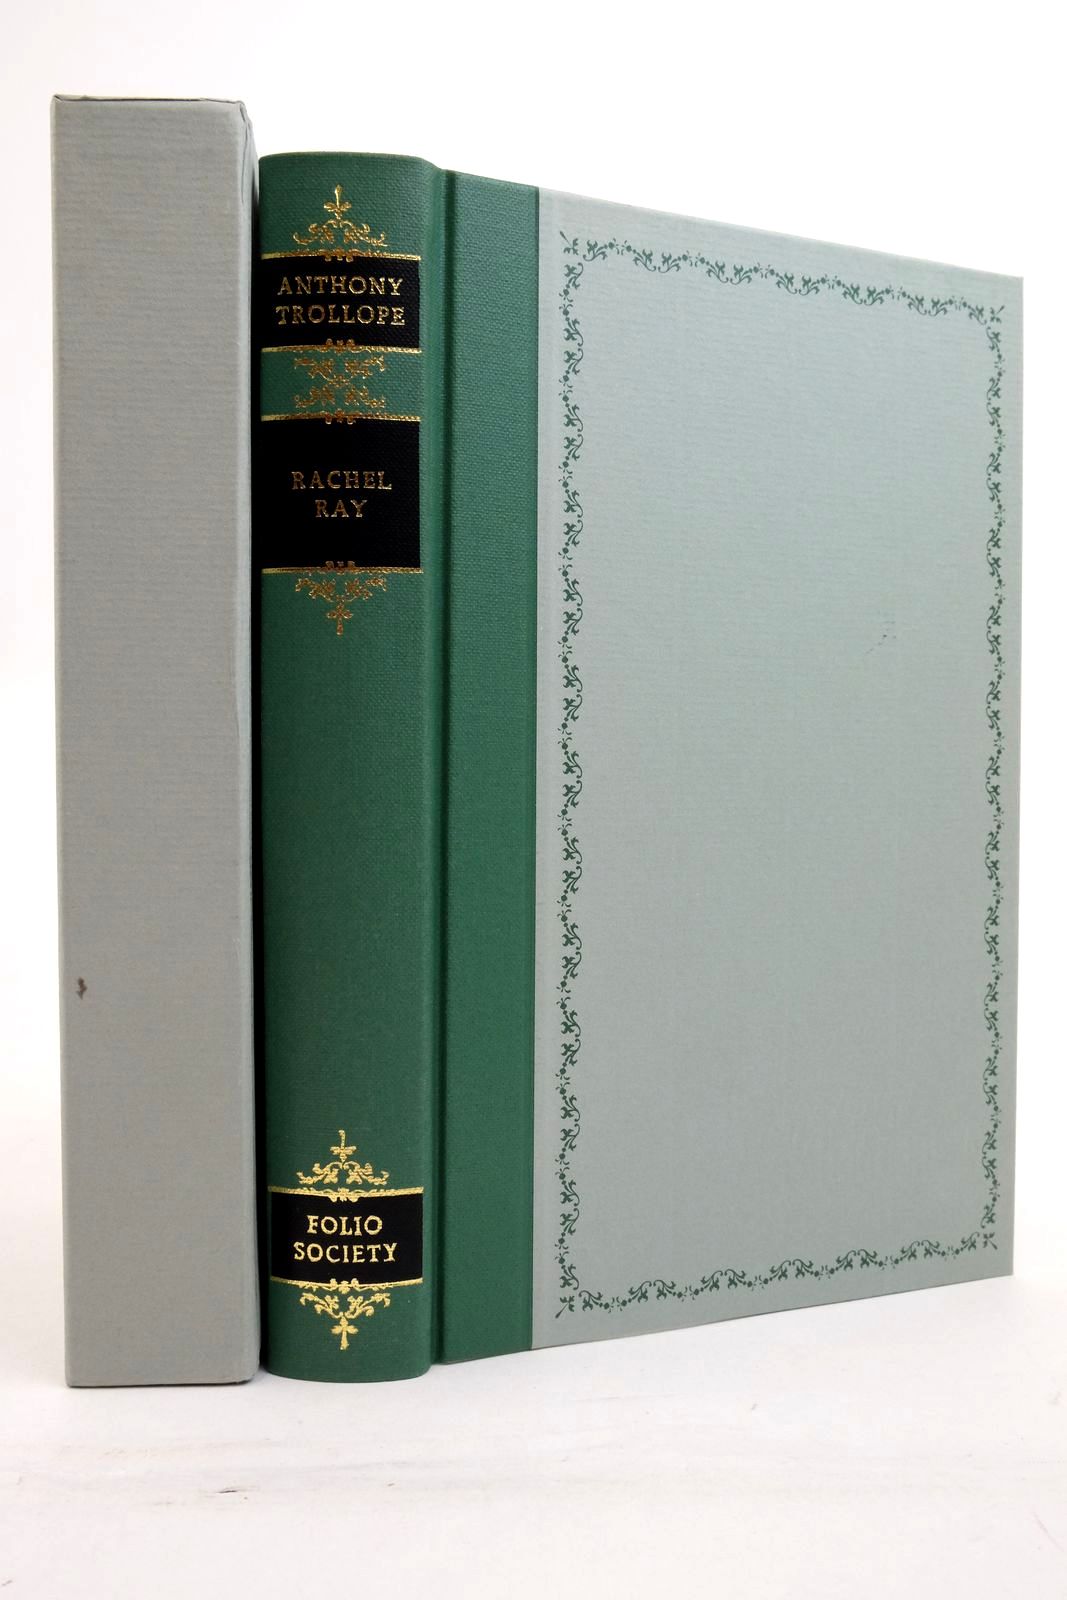 Photo of RACHEL RAY written by Trollope, Anthony illustrated by Eccles, David published by Folio Society (STOCK CODE: 2138188)  for sale by Stella & Rose's Books